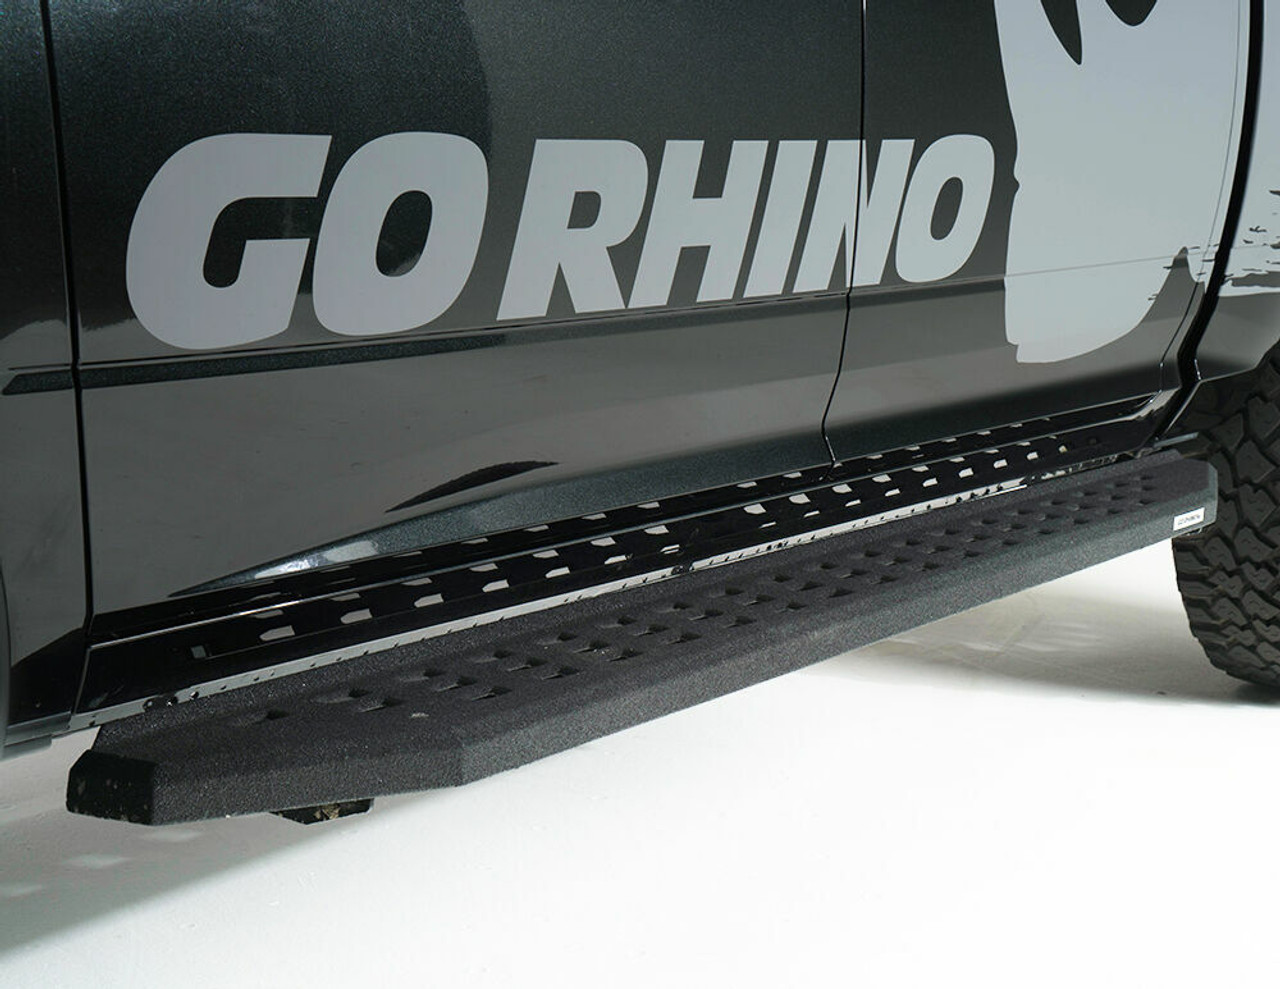 Go Rhino 69404887T Chevrolet, Silverado 1500, 2019 - 2021, RB20 Running boards - Complete Kit: RB20 Running boards + Brackets, Galvanized Steel, Protective Bedliner coating, 69400087T RB20 + 6940485 RB Brackets, New Body Style Only